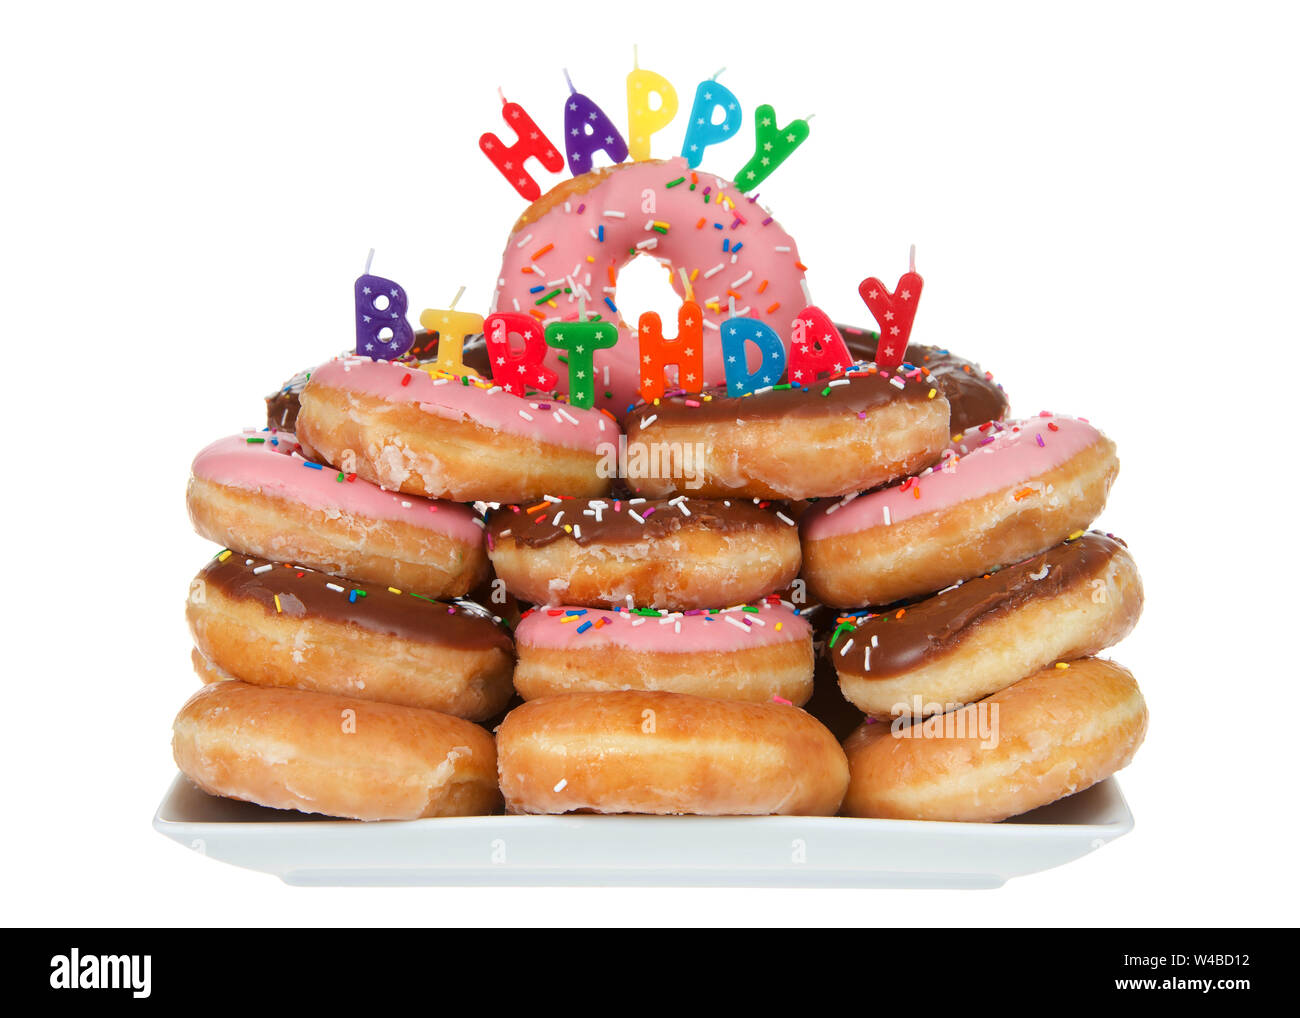 variety of glazed donuts stacked with happy birthday candles isolated on white pink strawberry and brown chocolate on a square porcelain plate W4BD12